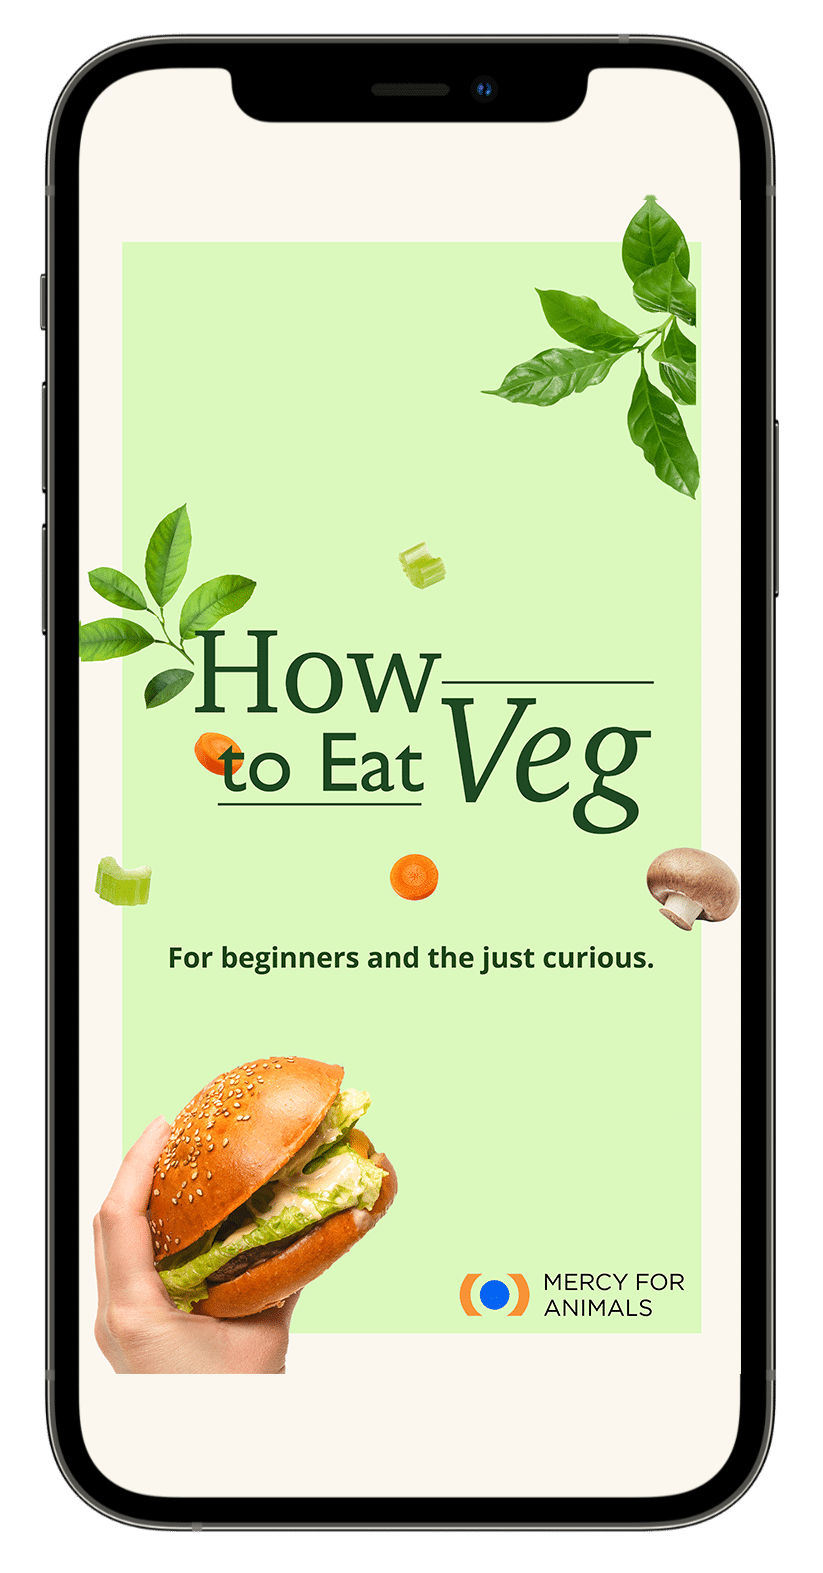 Apple iPhone screen displaying How to Eat Veg guide